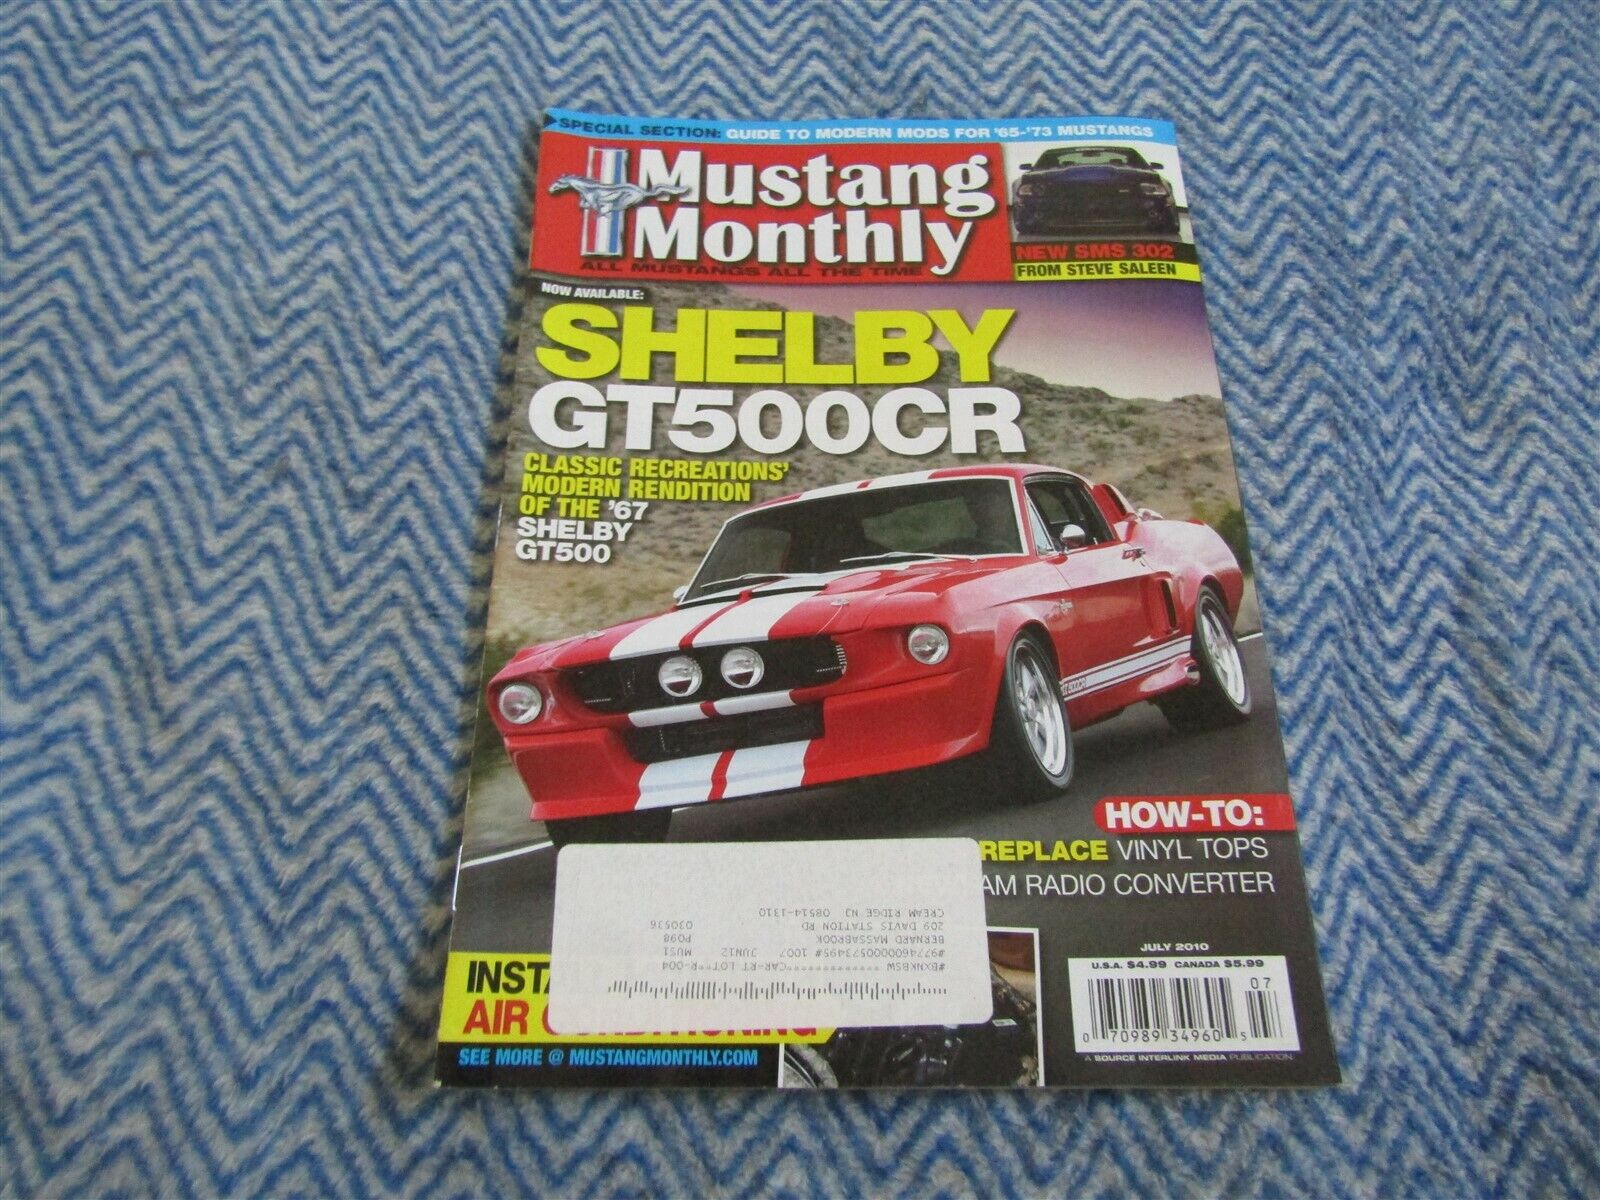 MUSTANG MONTHLY MAGAZINE AUG 2010 SHELBY GT500CR CLASSIC MODERN 67 SHELBY GT500 